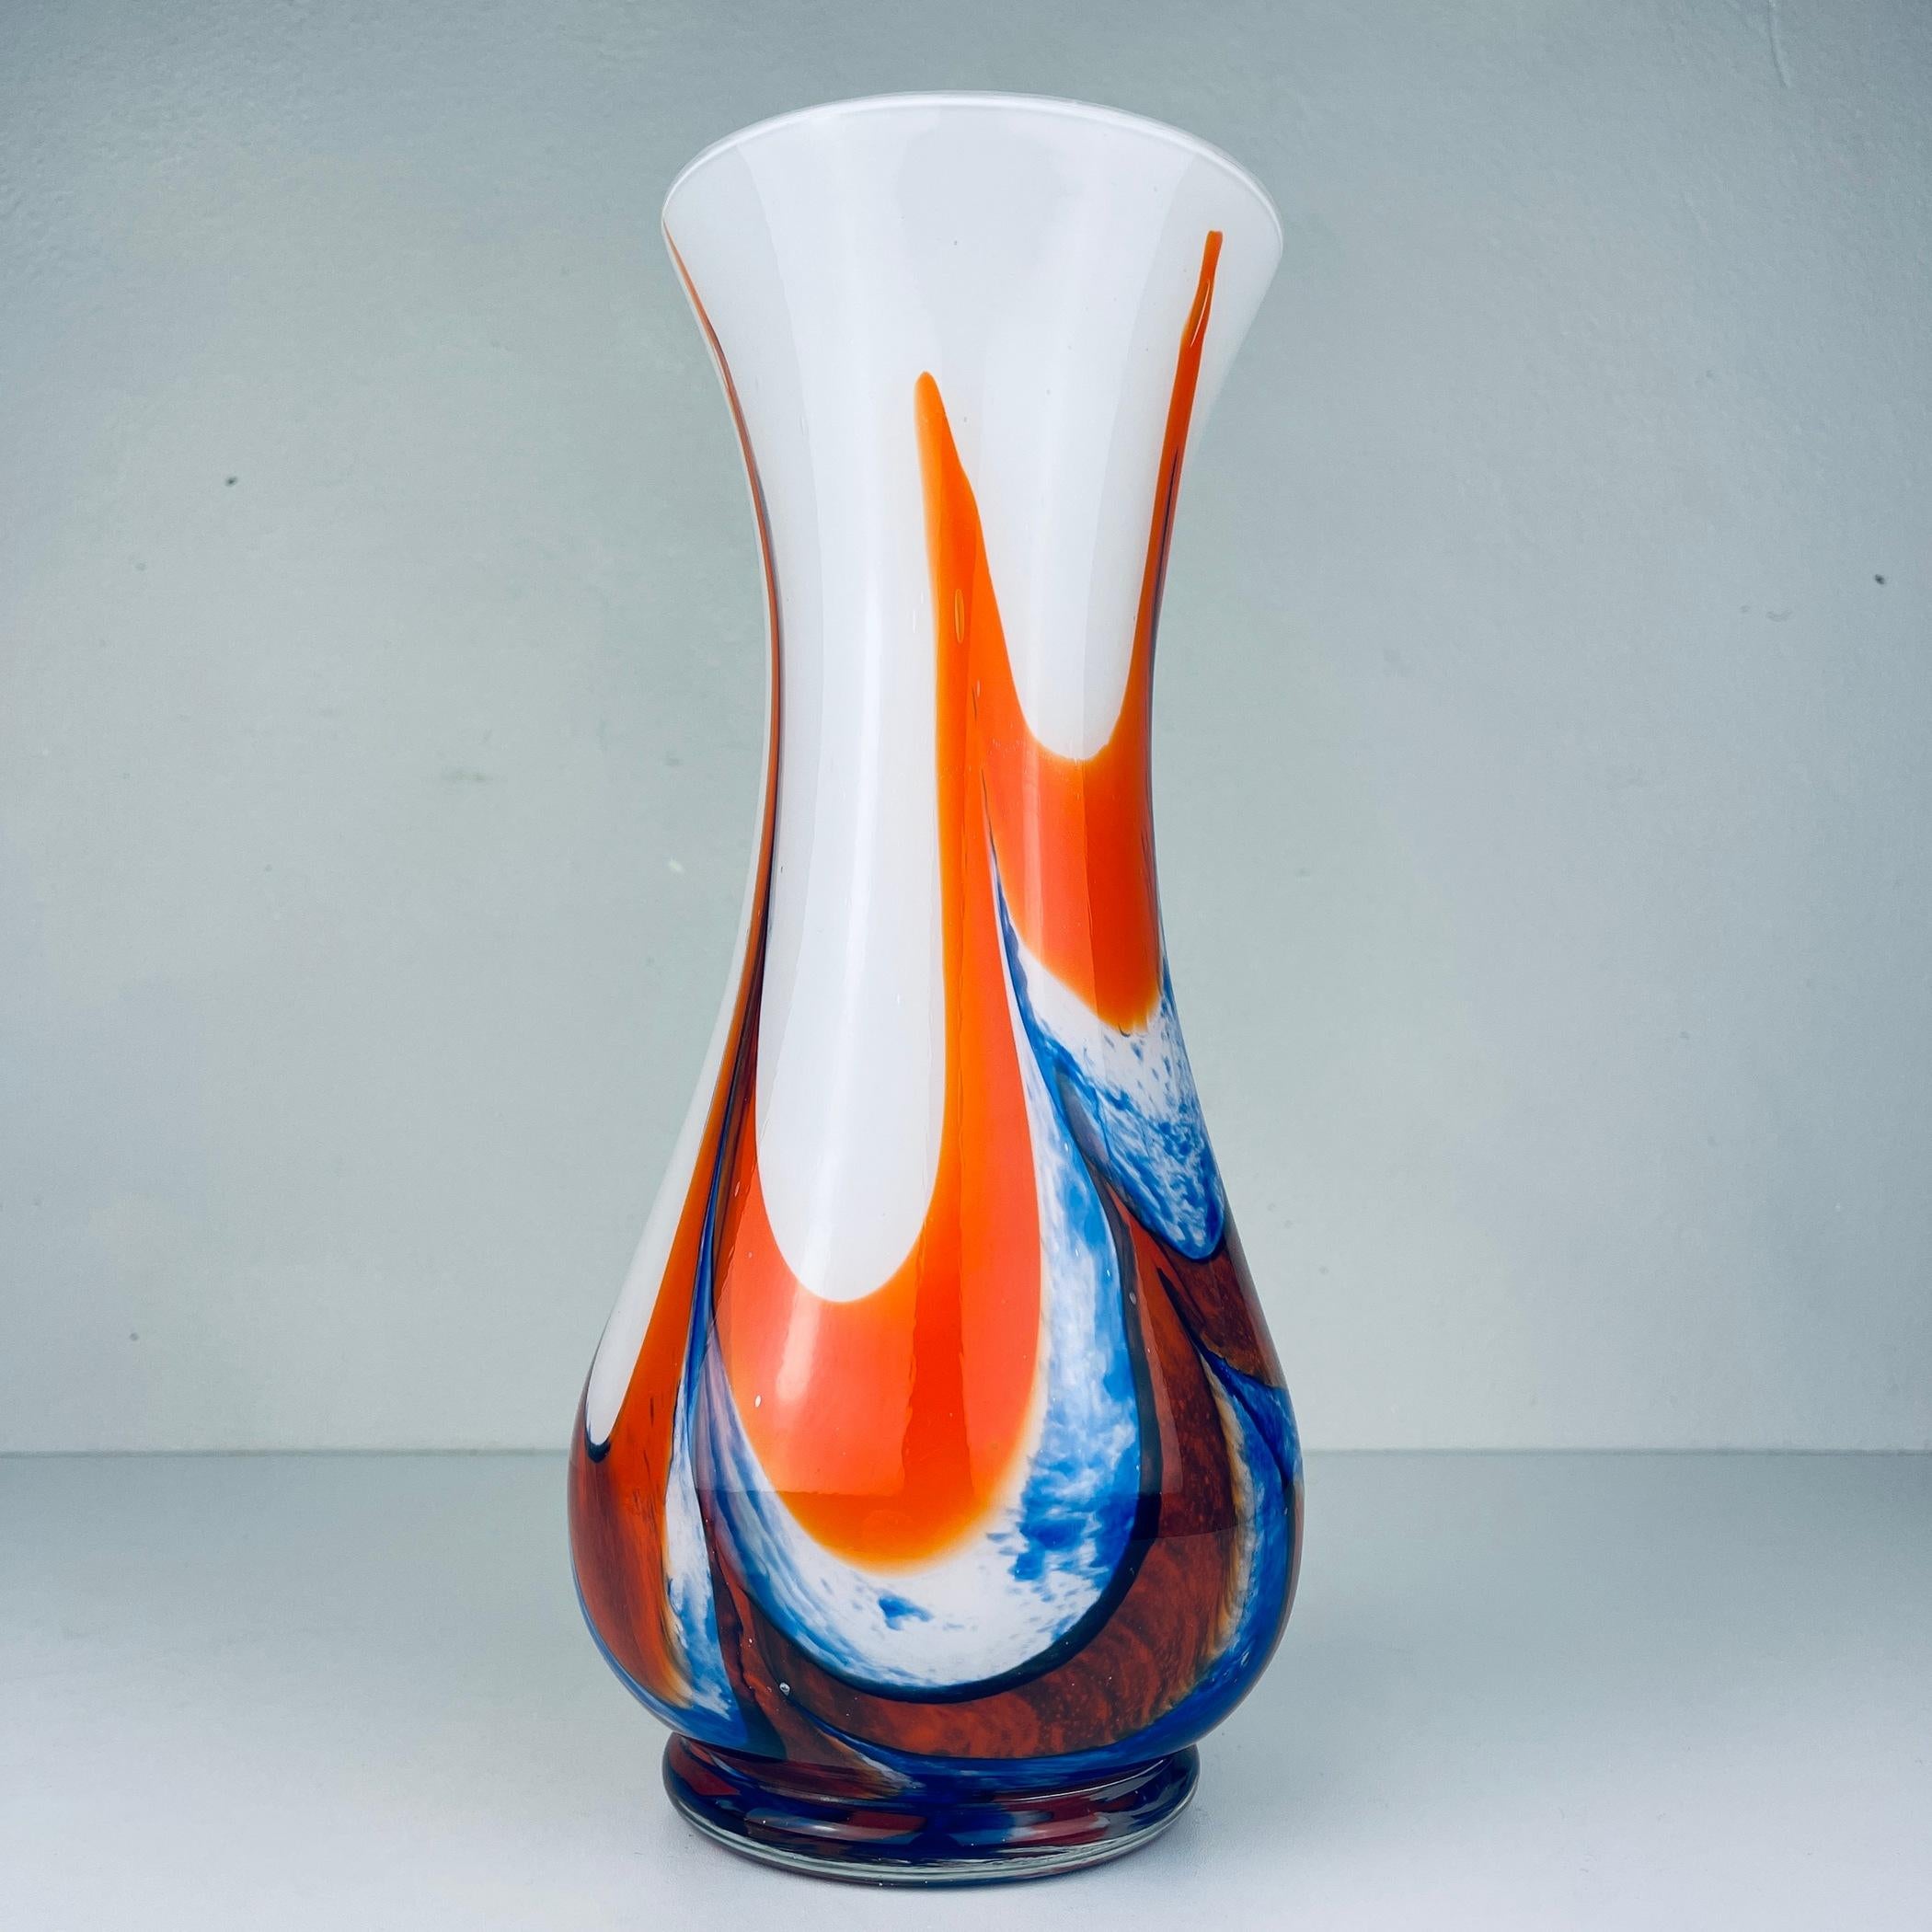 20th Century Murano Glass Hand-Cut Vase by Carlo Moretti, Italy, 1970s For Sale